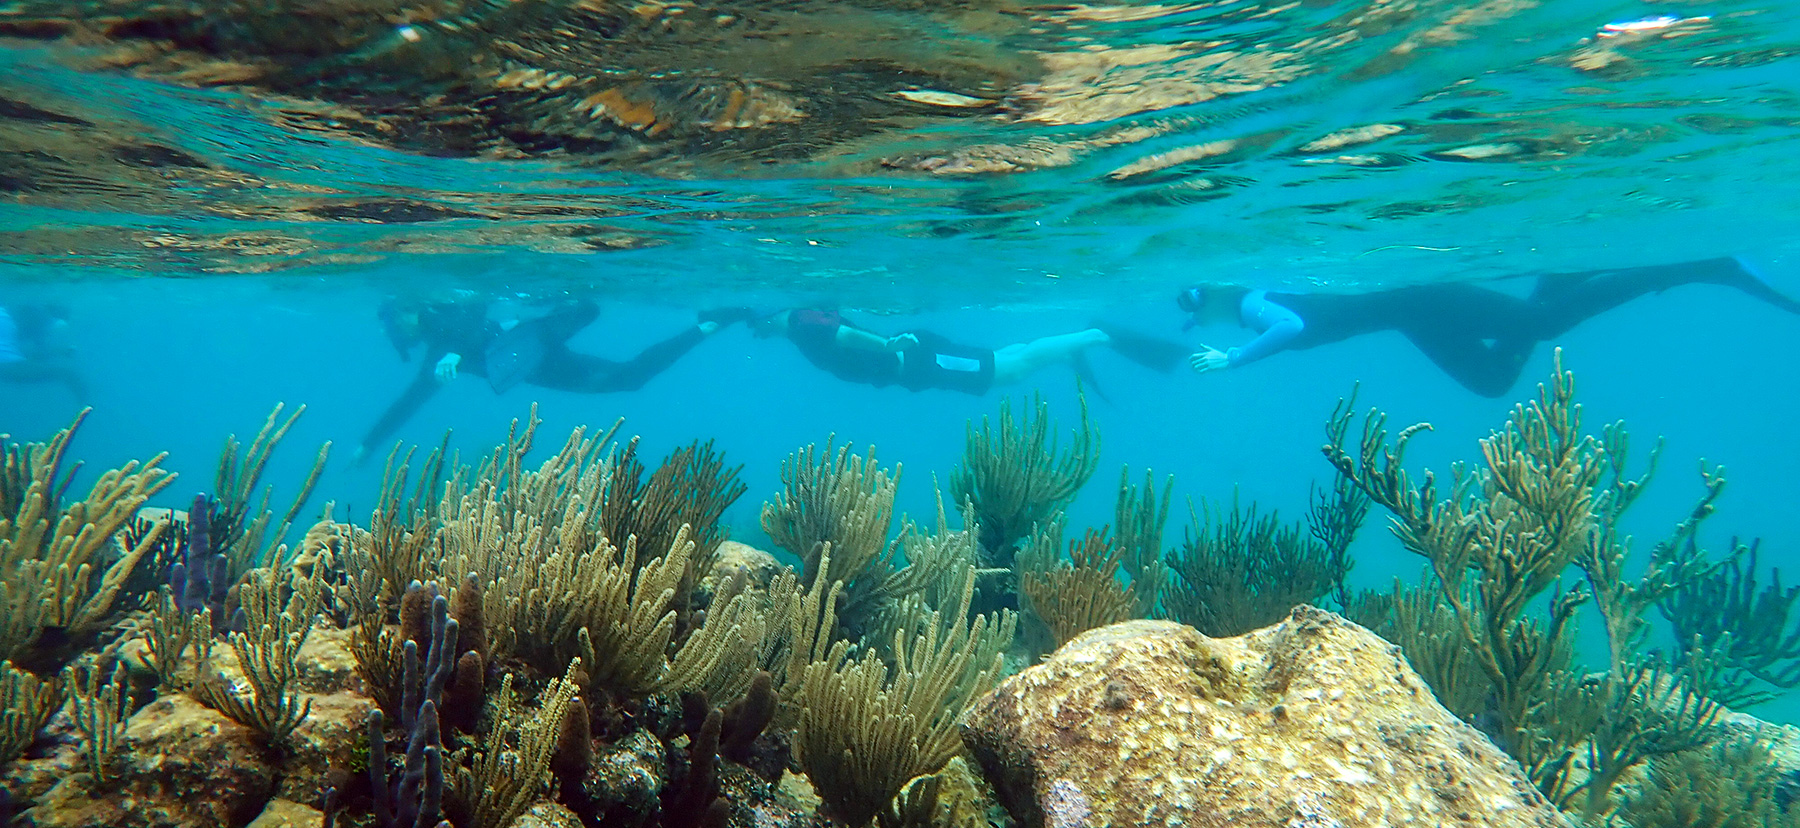 Several students snorkeling in clear turquoise waters of the Caribbean 